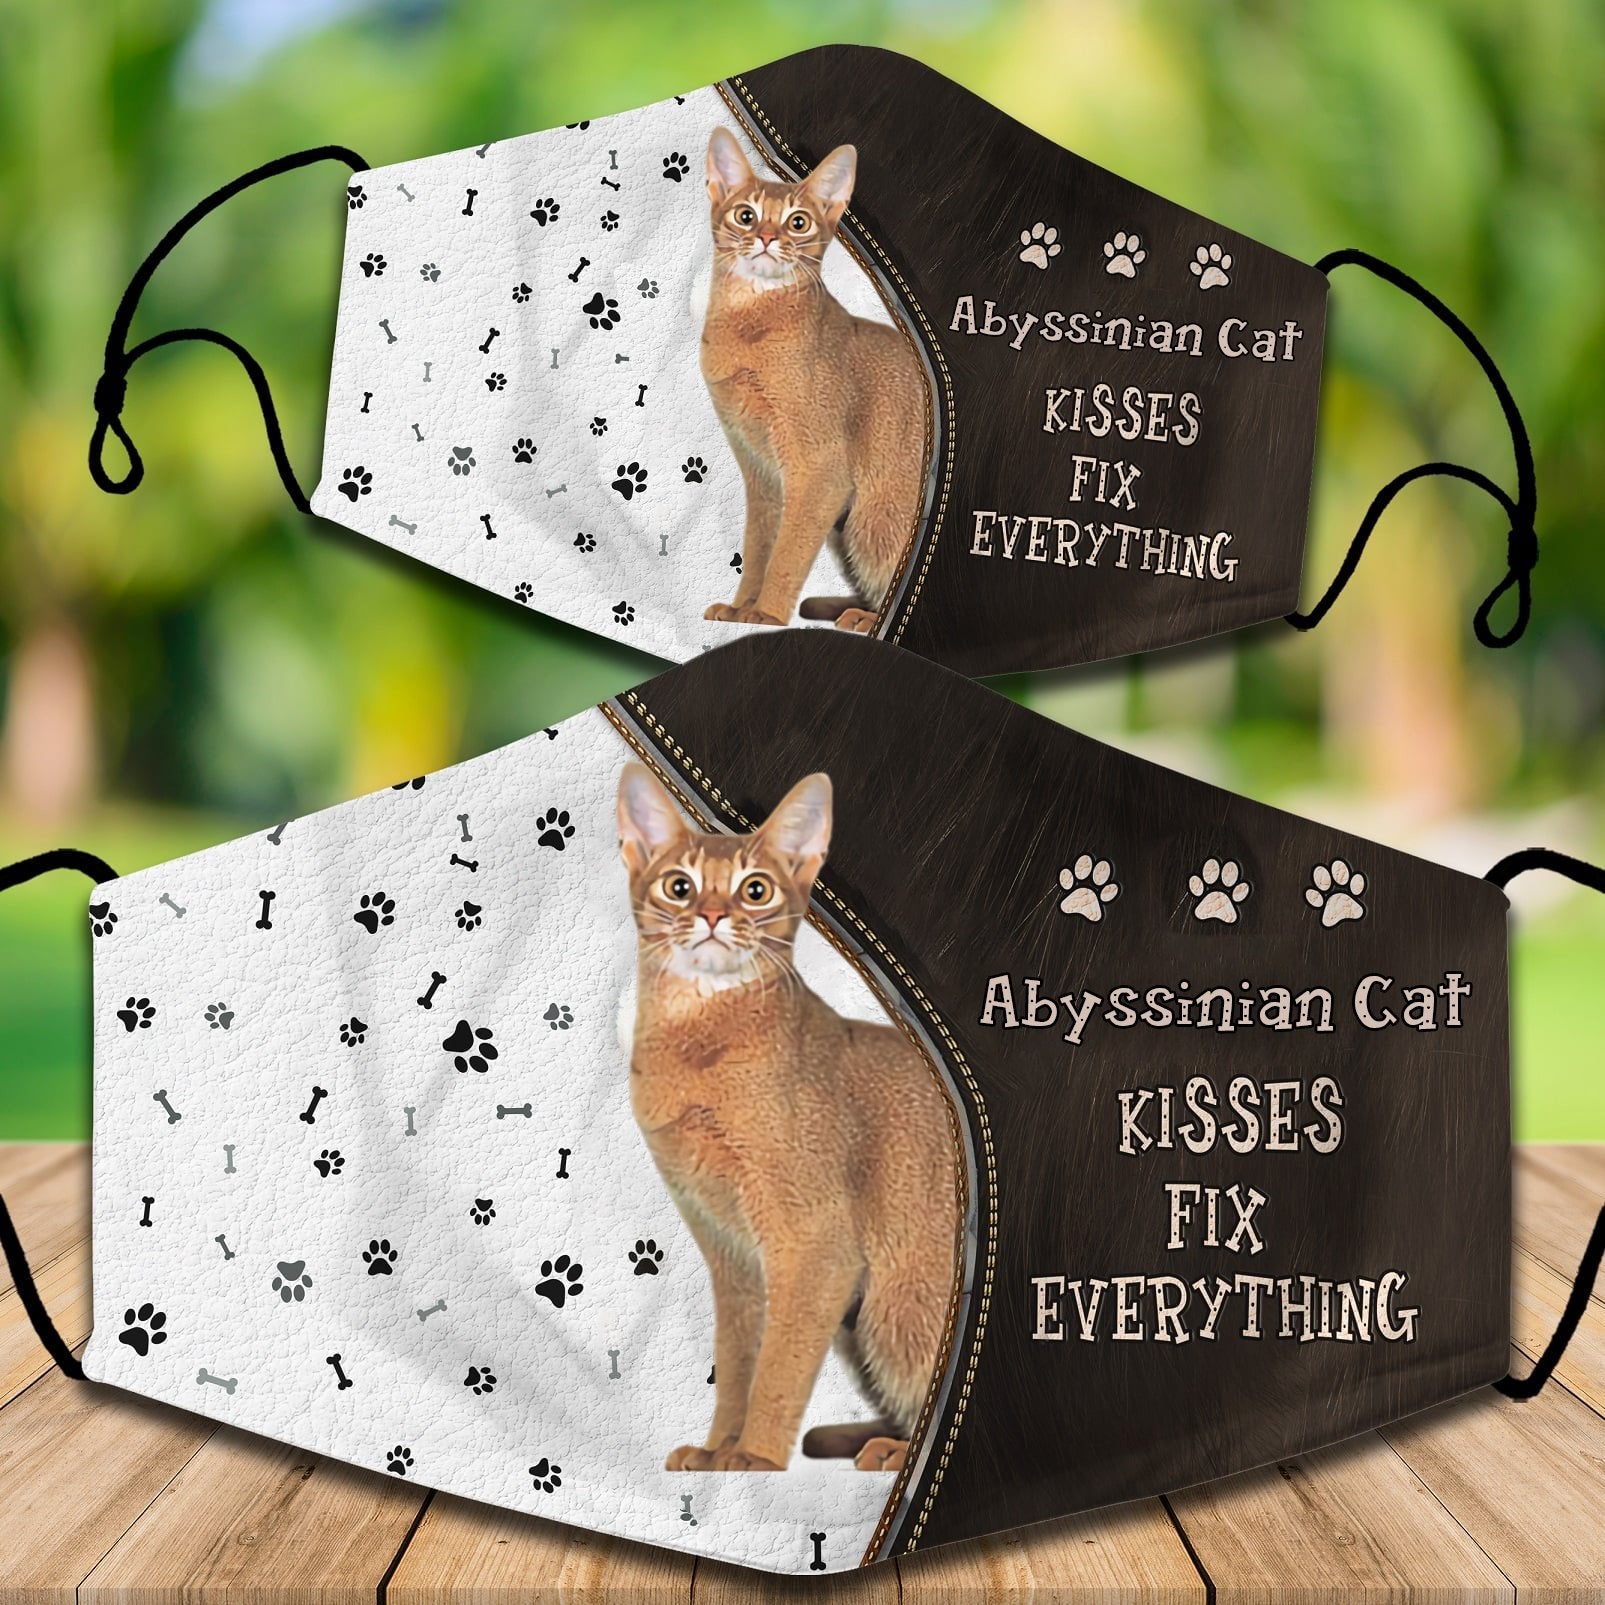 Abyssinian Cat Kisses Fix Everything Veil